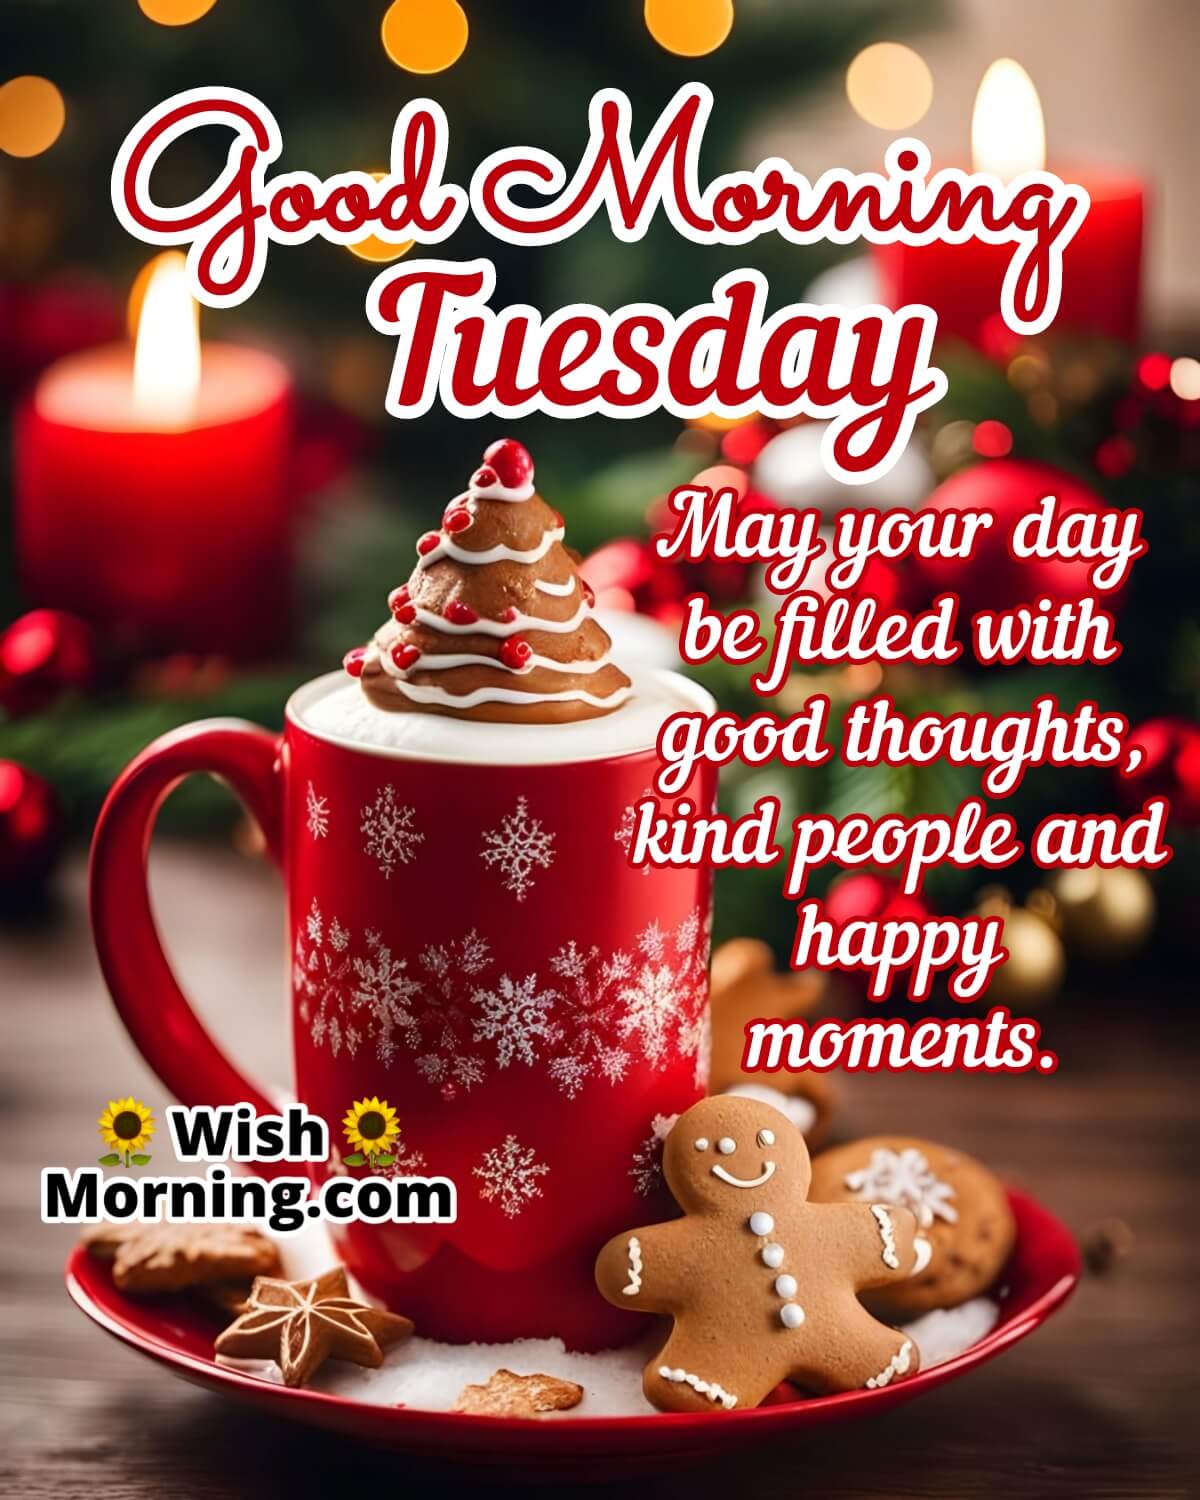 Good Morning Tuesday Morning Wishes